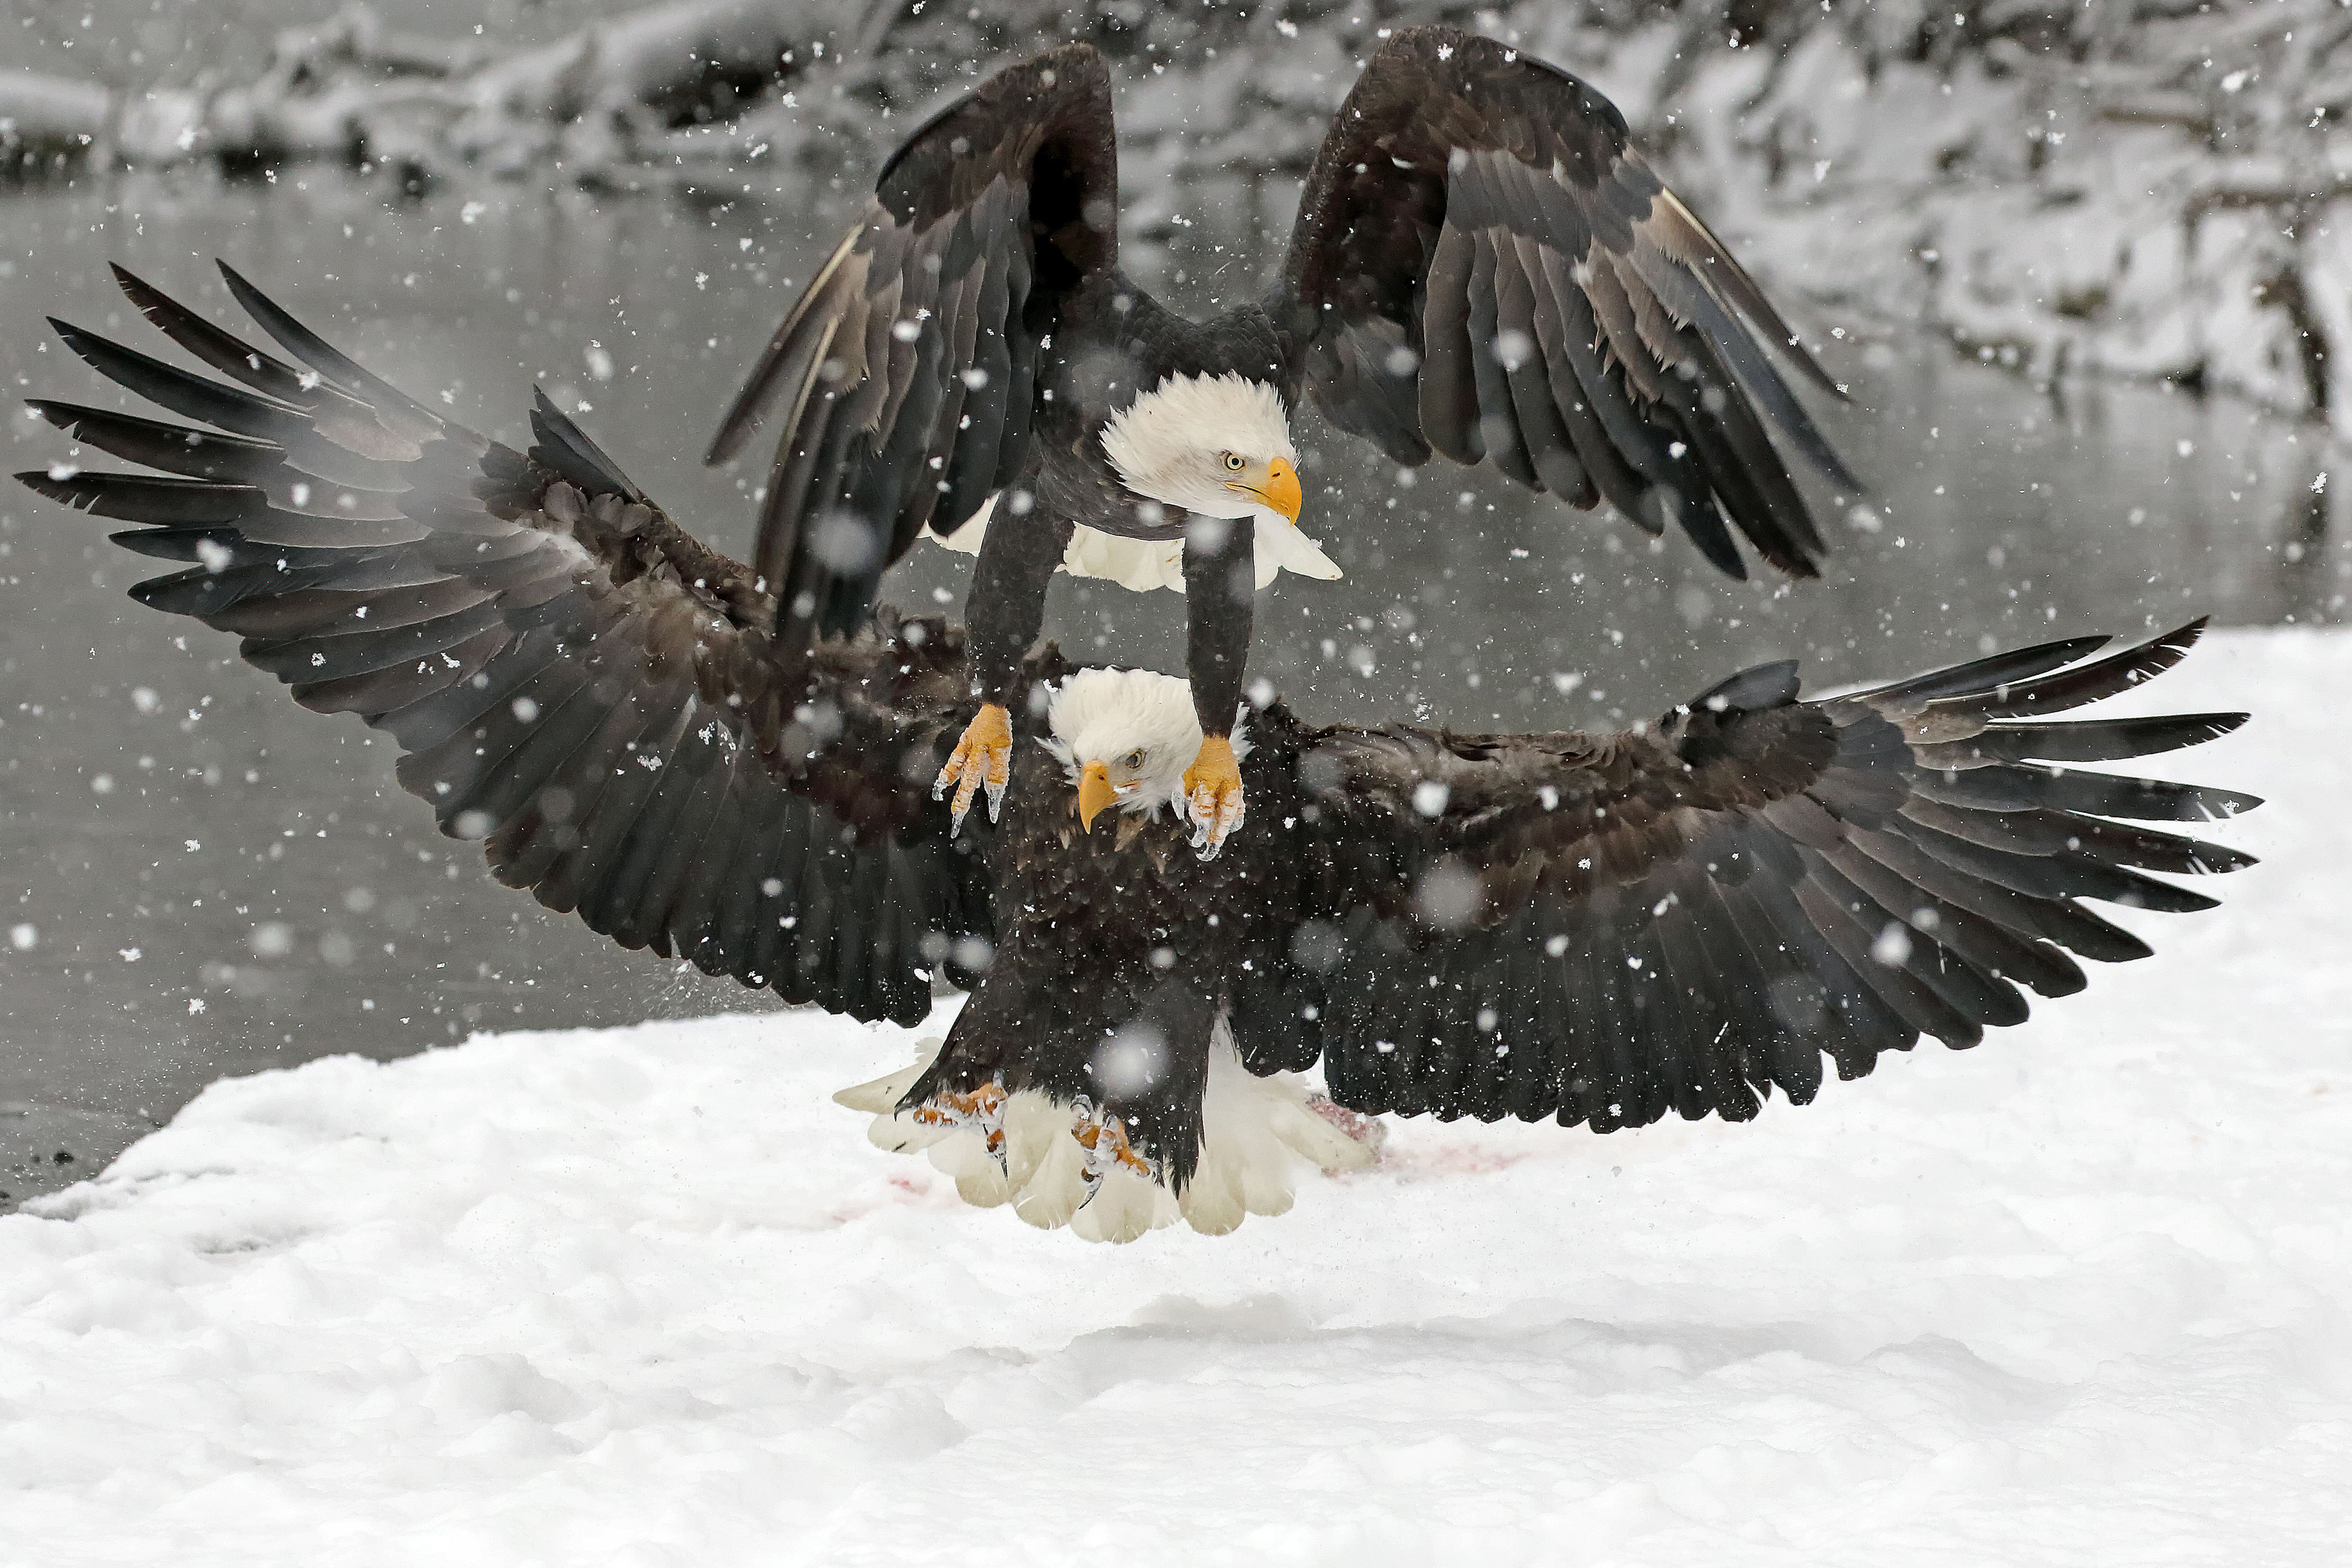 'The Battle'. The eagles were fighting for a piece of salmon.  The eagle on top flew on top of the second eagle to try and get the salmon.  Photographed at the Eagle Fest at Haines, AK in 2018. The eagles were fighting for a piece of salmon. The eagle on top flew on top of the second eagle to try and get the salmon. Photographed at the Eagle Fest at Haines, AK. © Rick Dowling/TNC Photo Contest